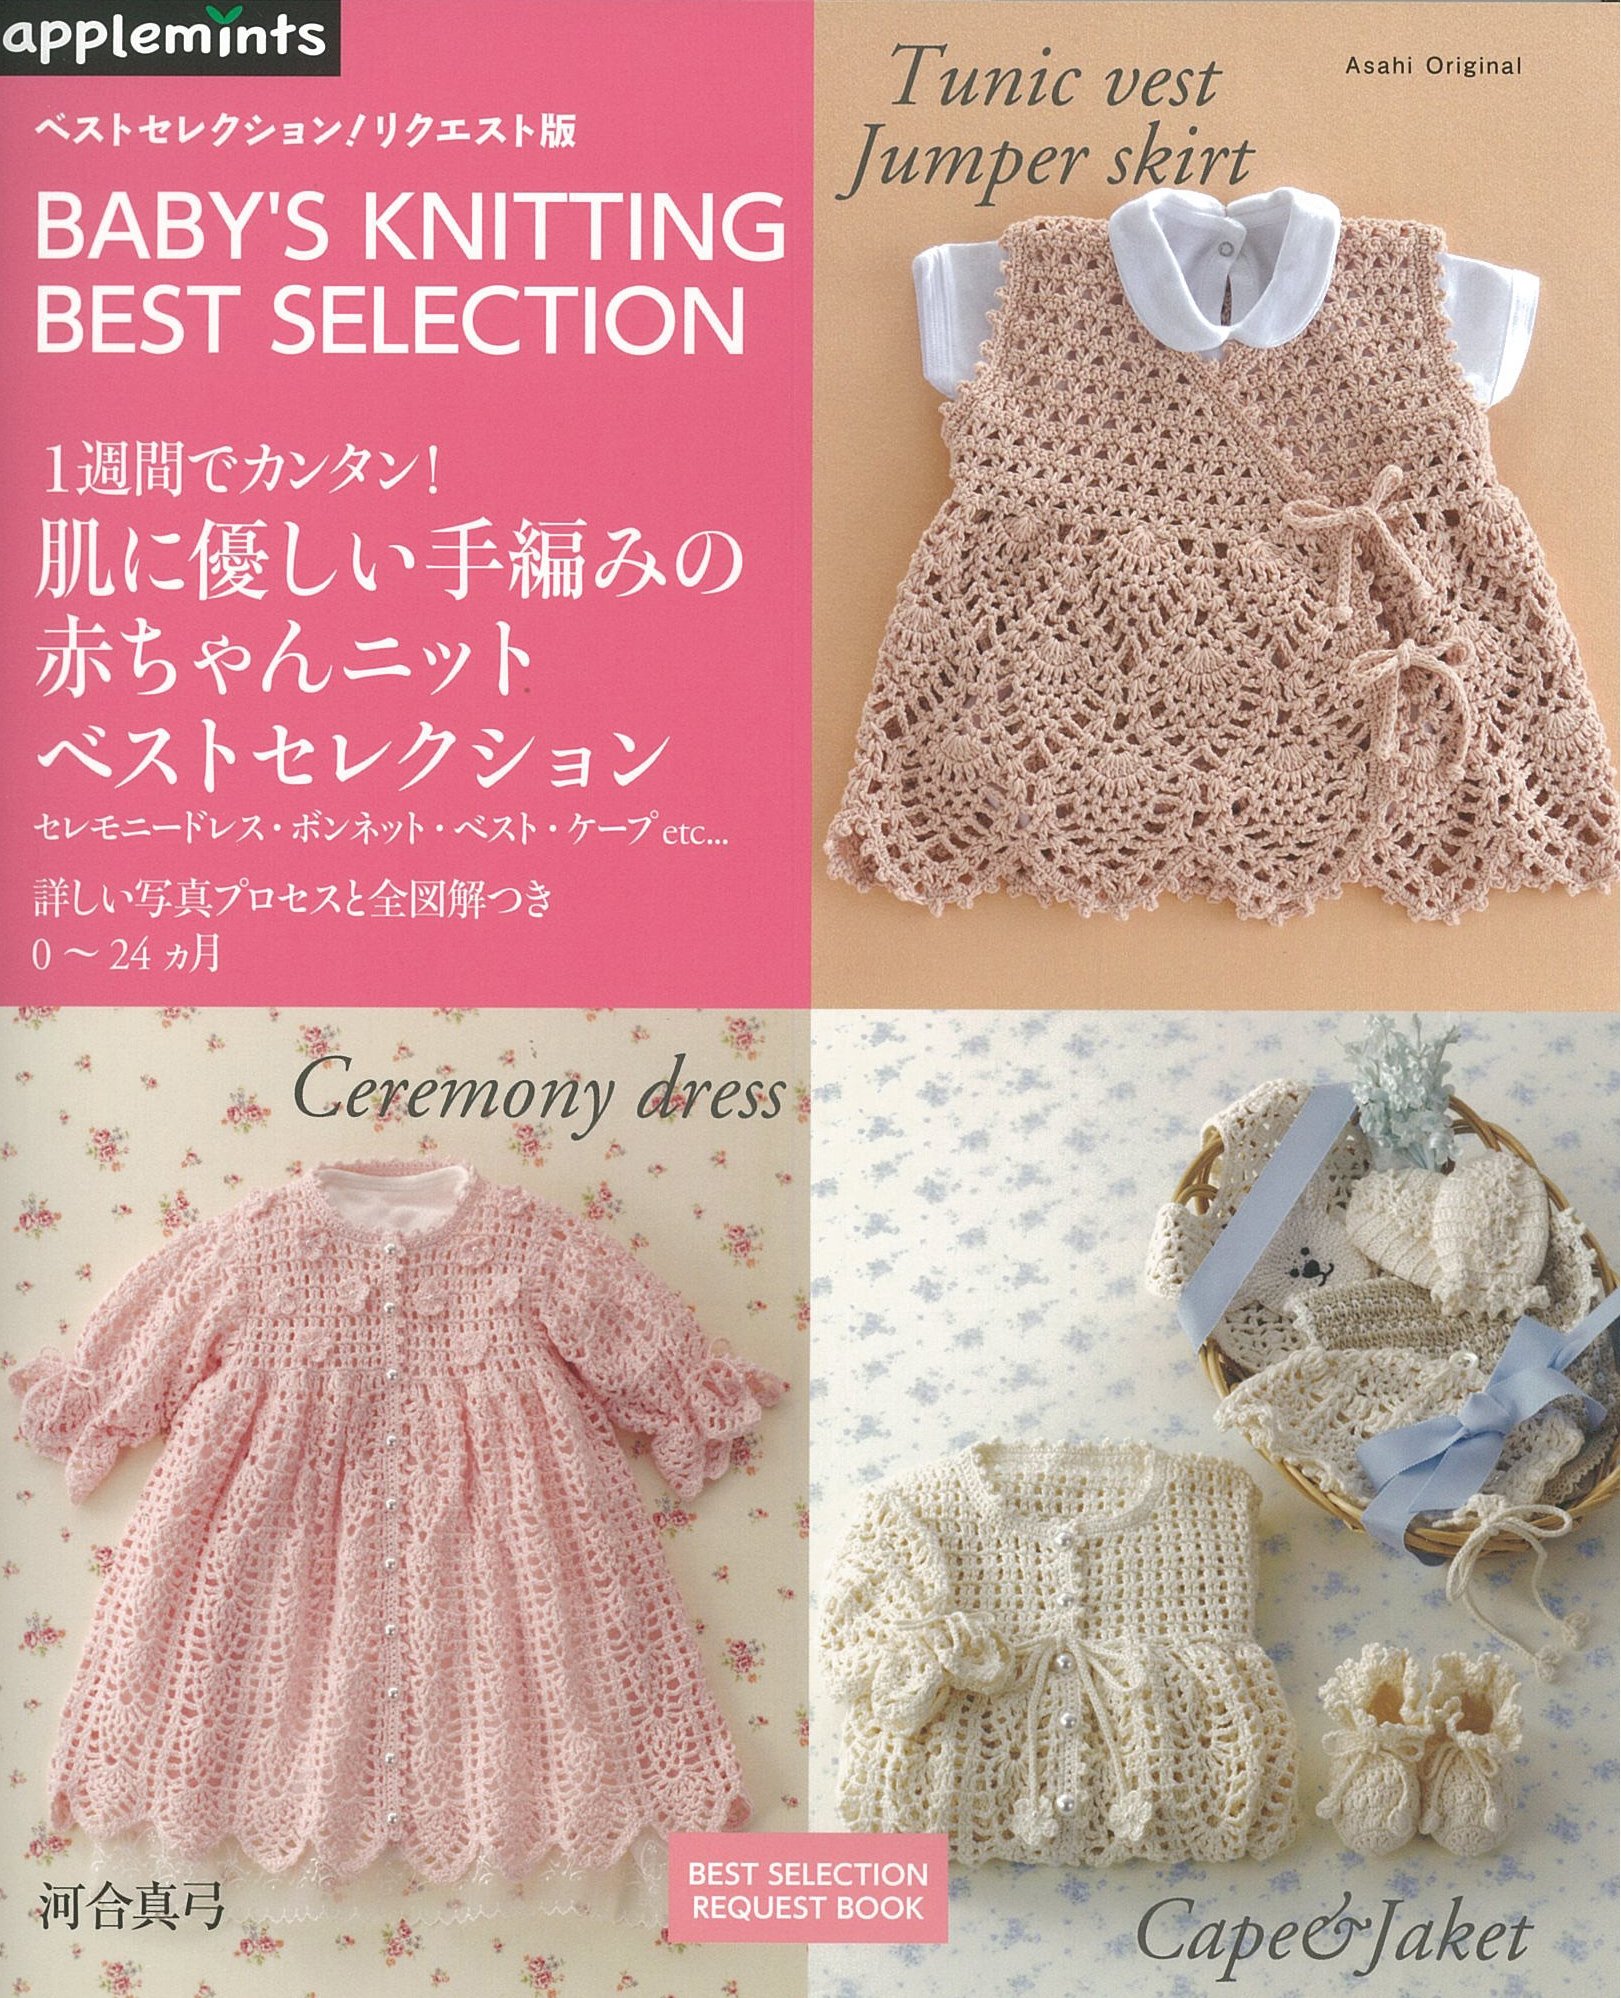 Best Selection. Hand-knitted cute baby knit 